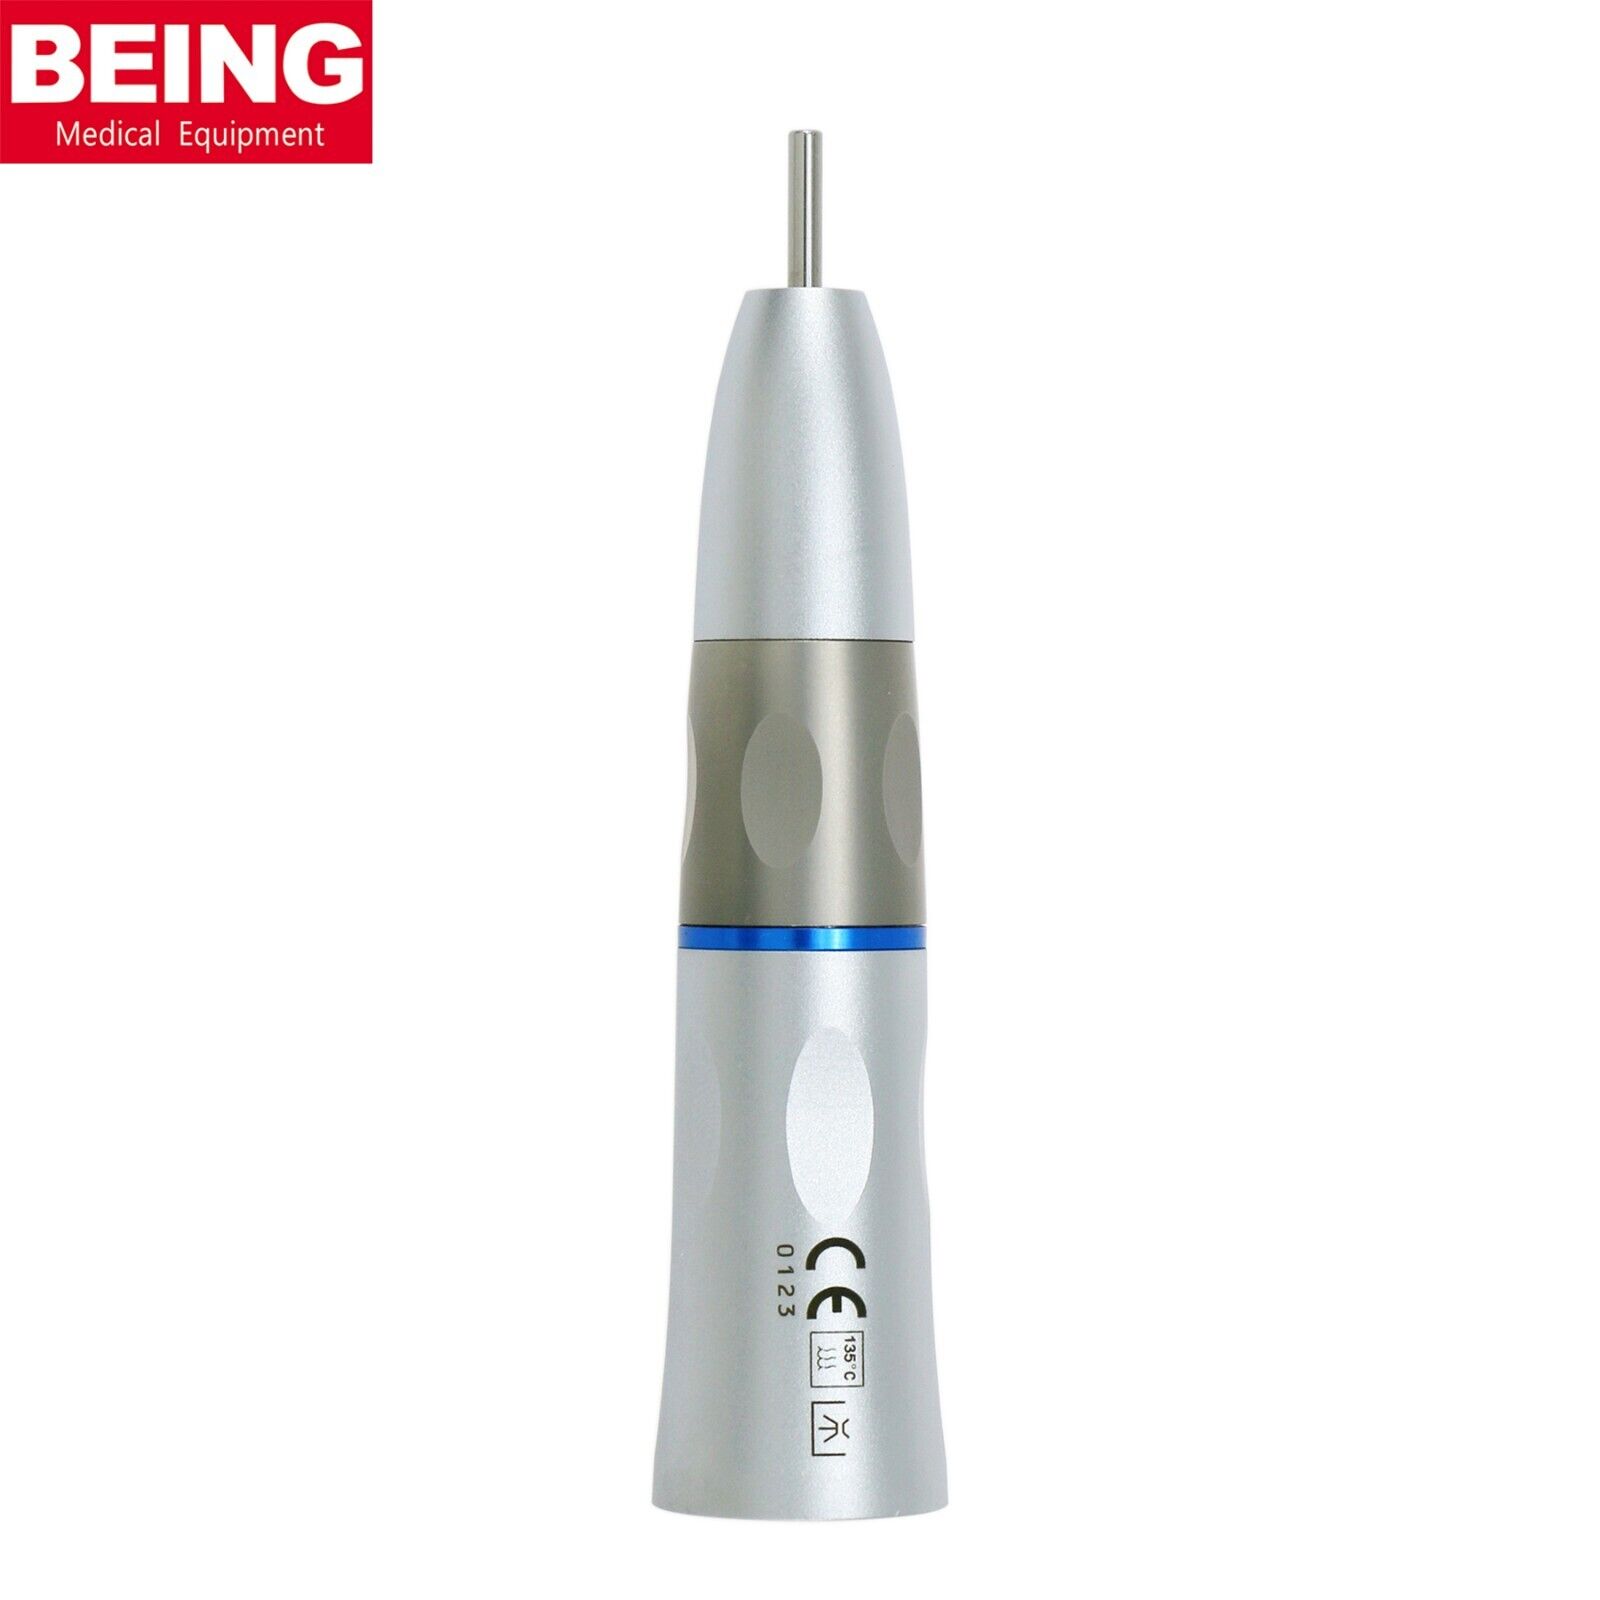 BEING Dental Low Speed Handpiece Fiber Optic Contra Angle 1:1 4:1 16:1 20:1 1:5